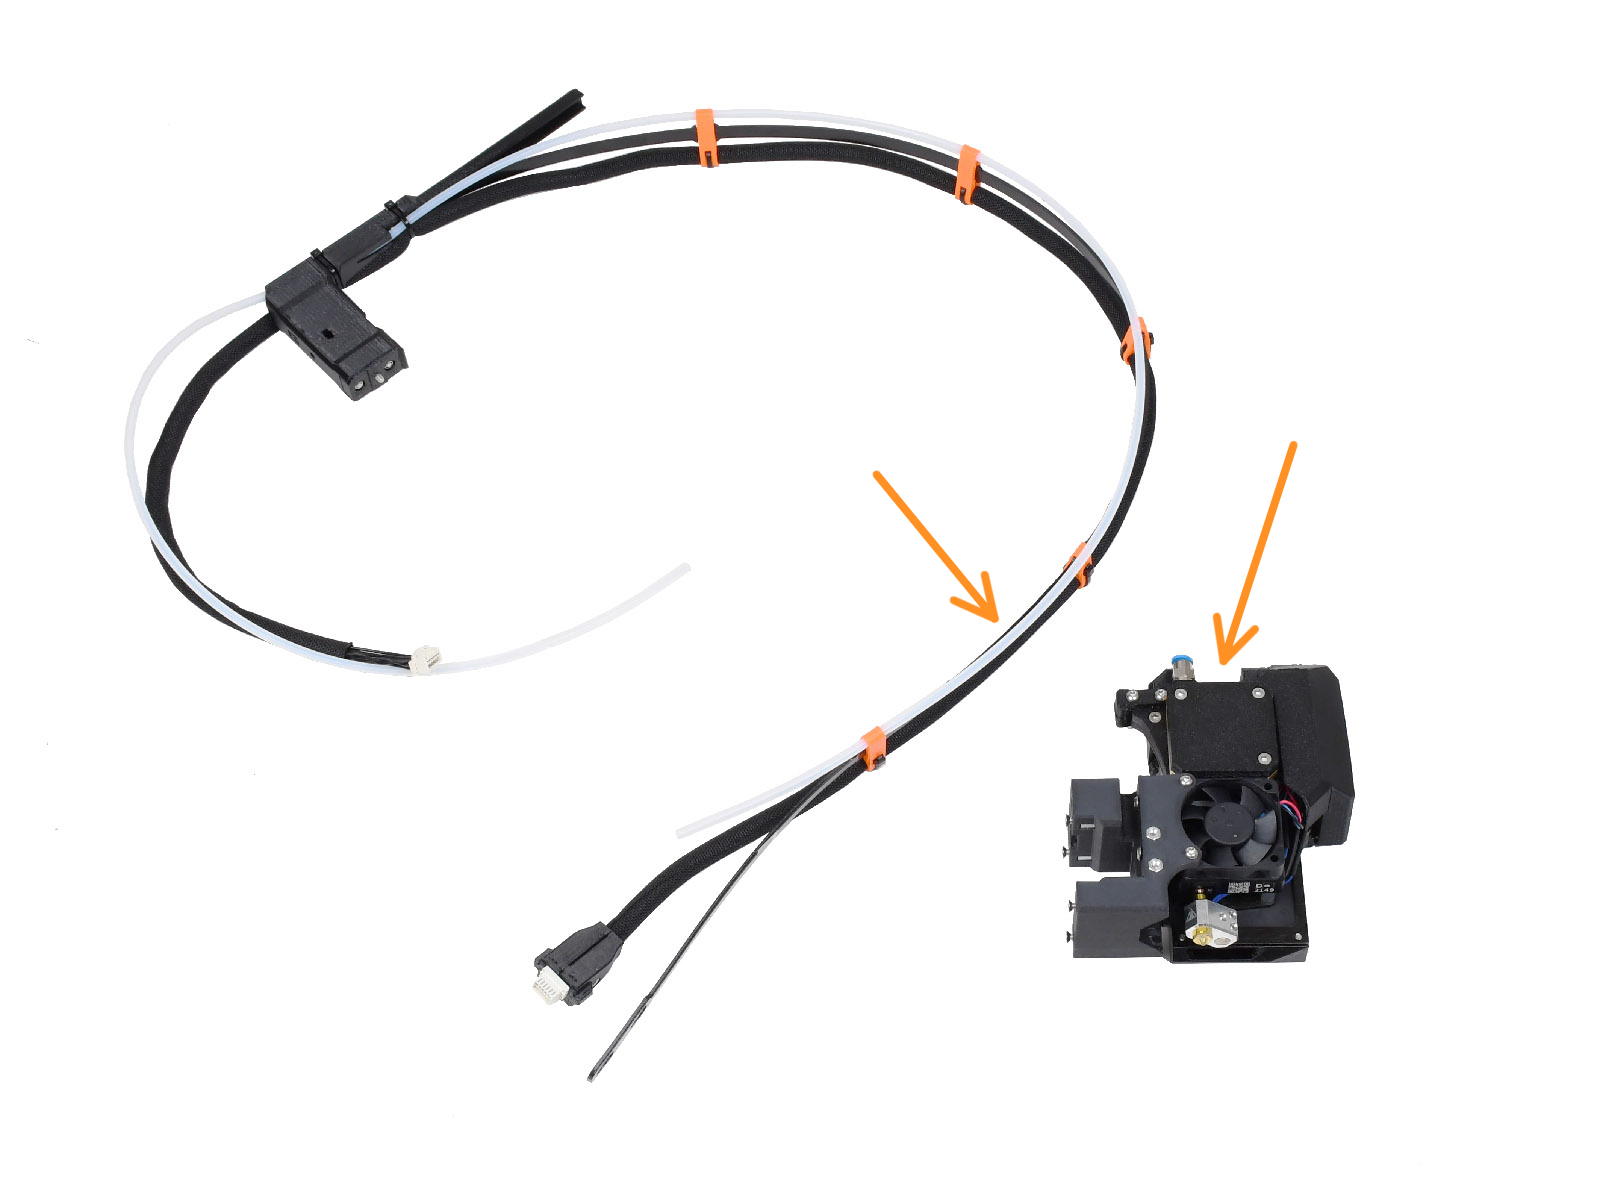 Extruder cable bundle assembly info